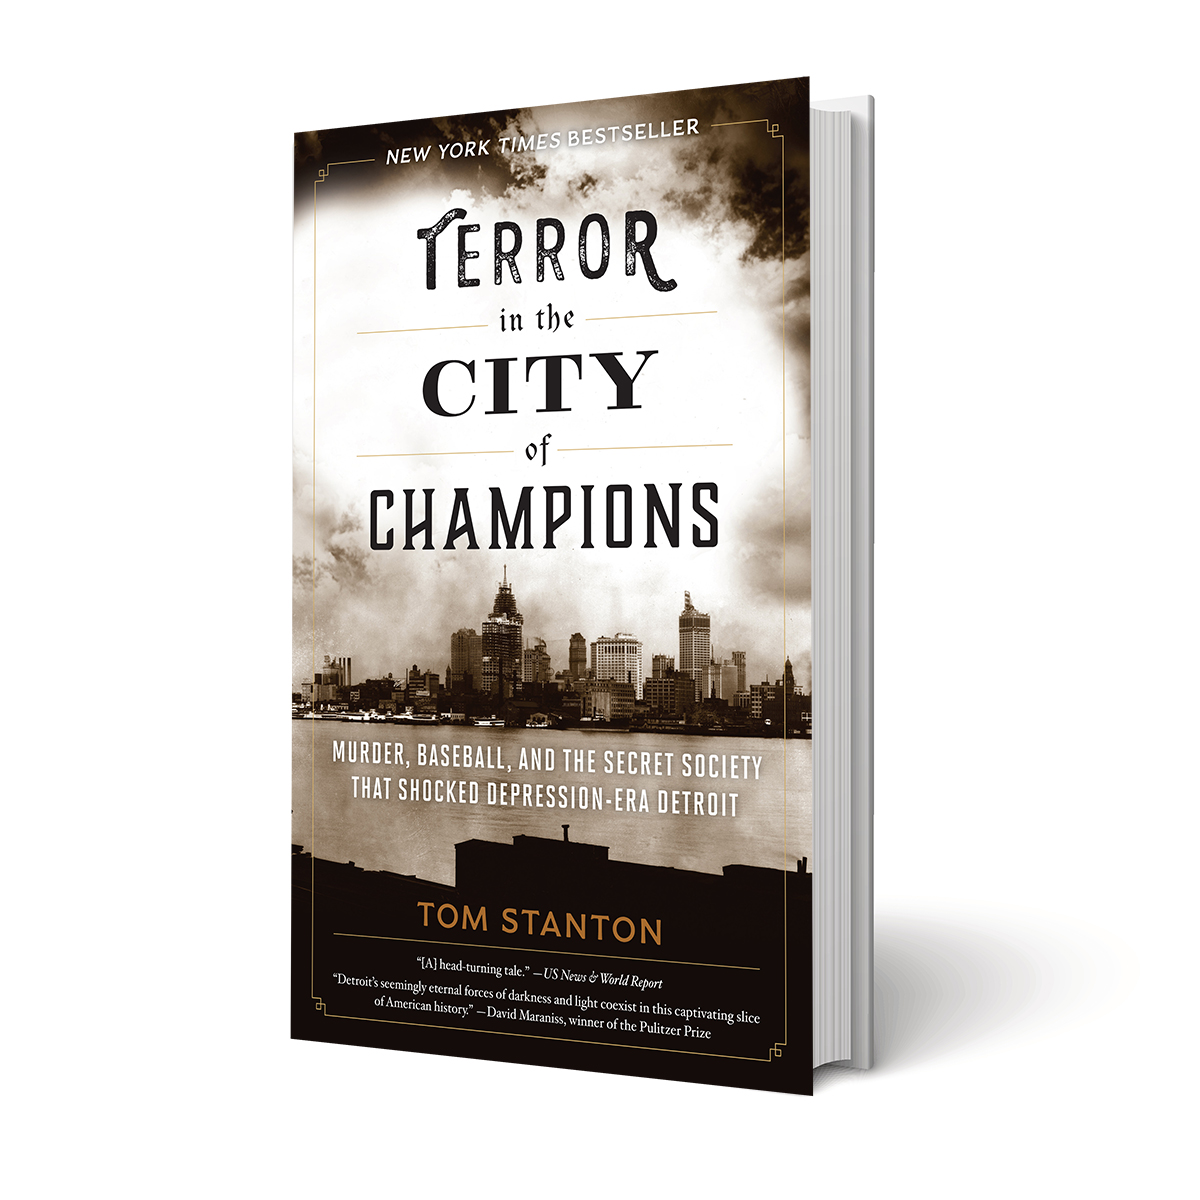 Book cover design by Jen Huppert Design for the New York Times Bestseller, Terror in the City of Champions: Murder, Baseball, and the Secret Society That Shocked Depression-Era Detroit by Tom Stanton, published by Lyons Press.